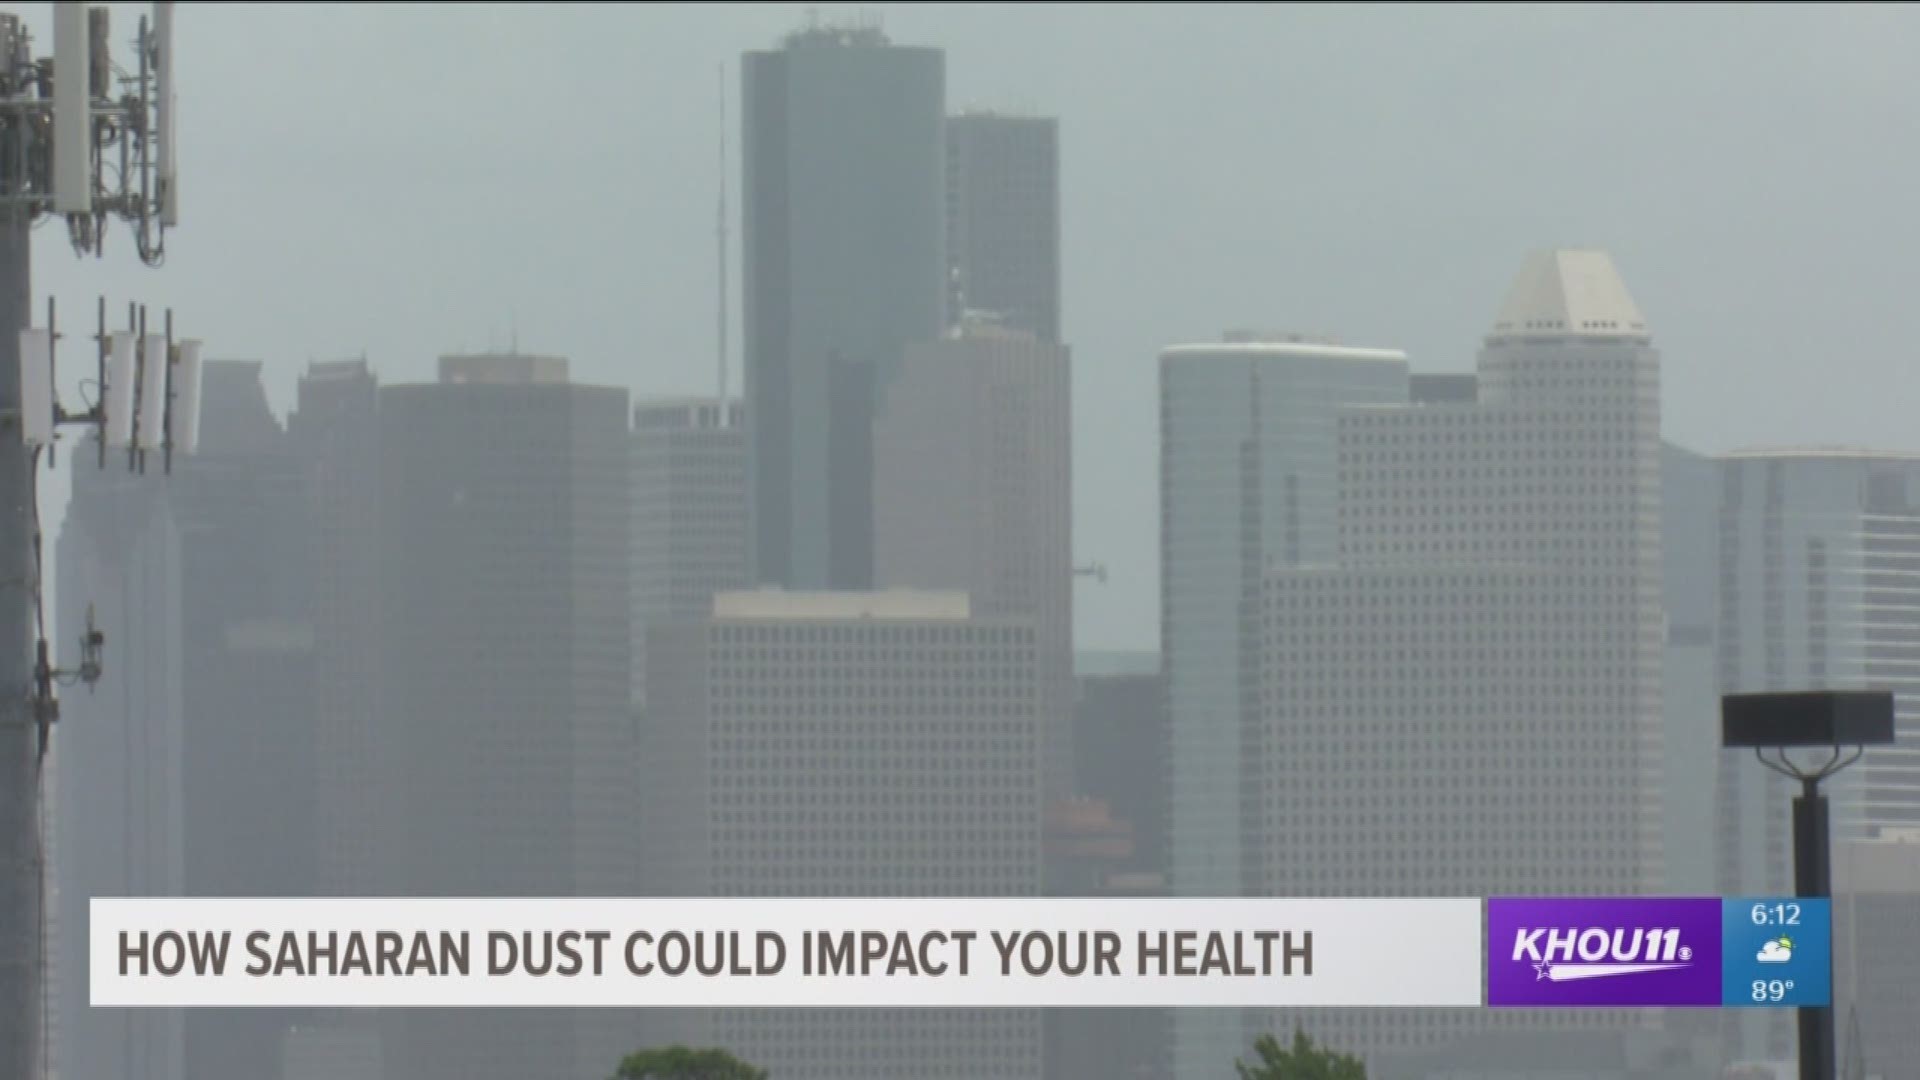 The Saharan dust could impact your health.